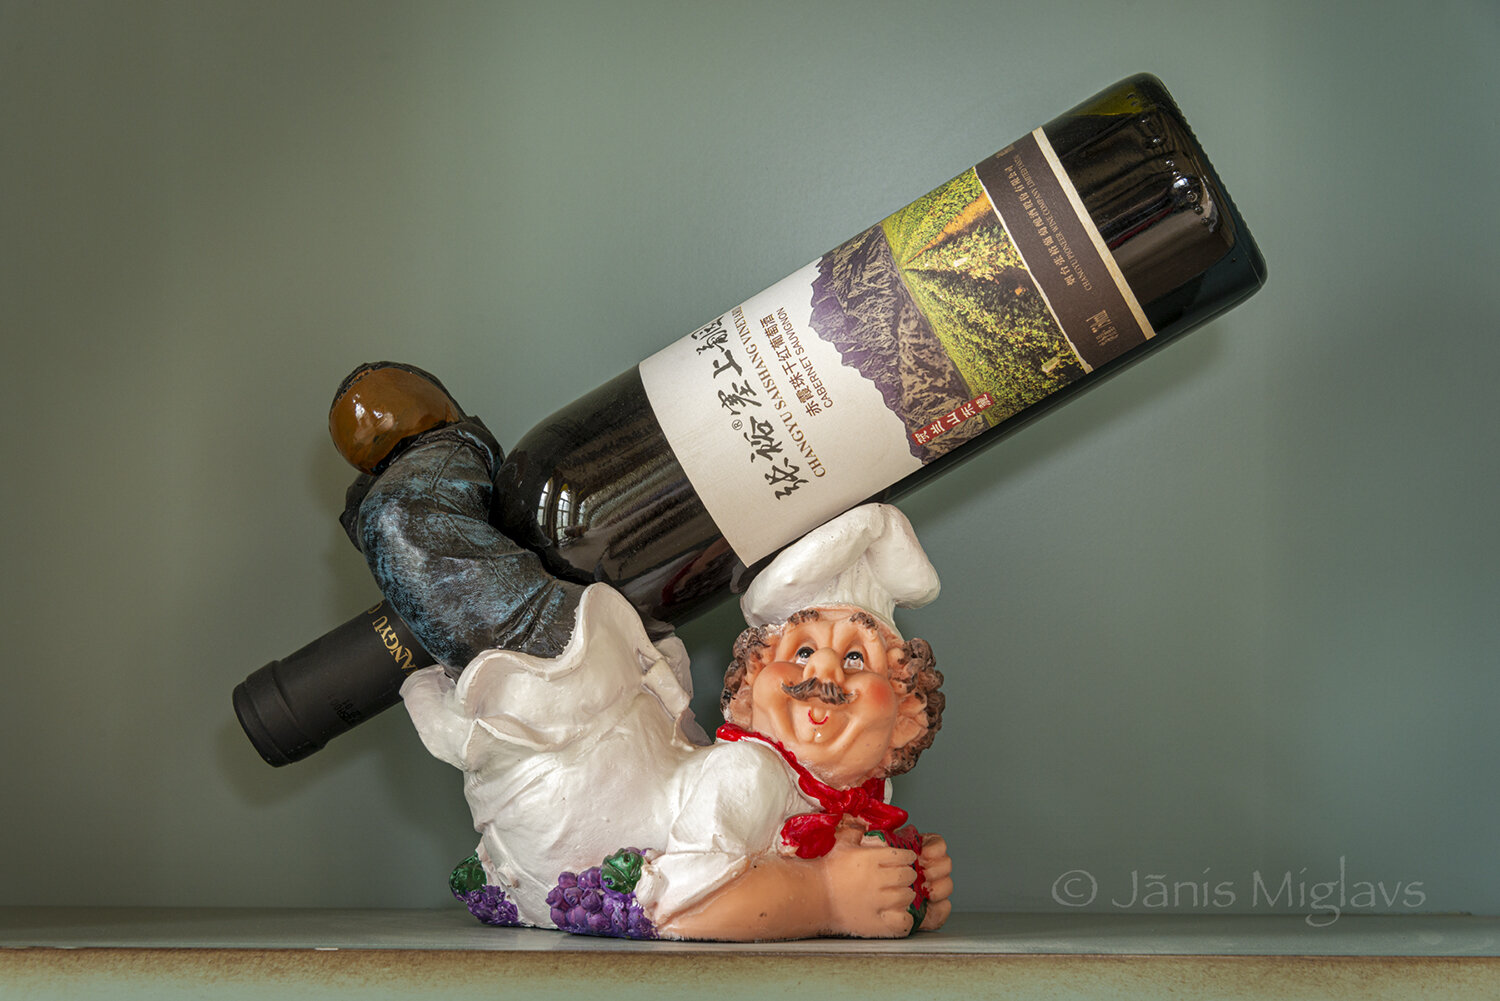 Chef charicture wine bottle holder at Chateau Changyu Moser XV, Ningxia, China.